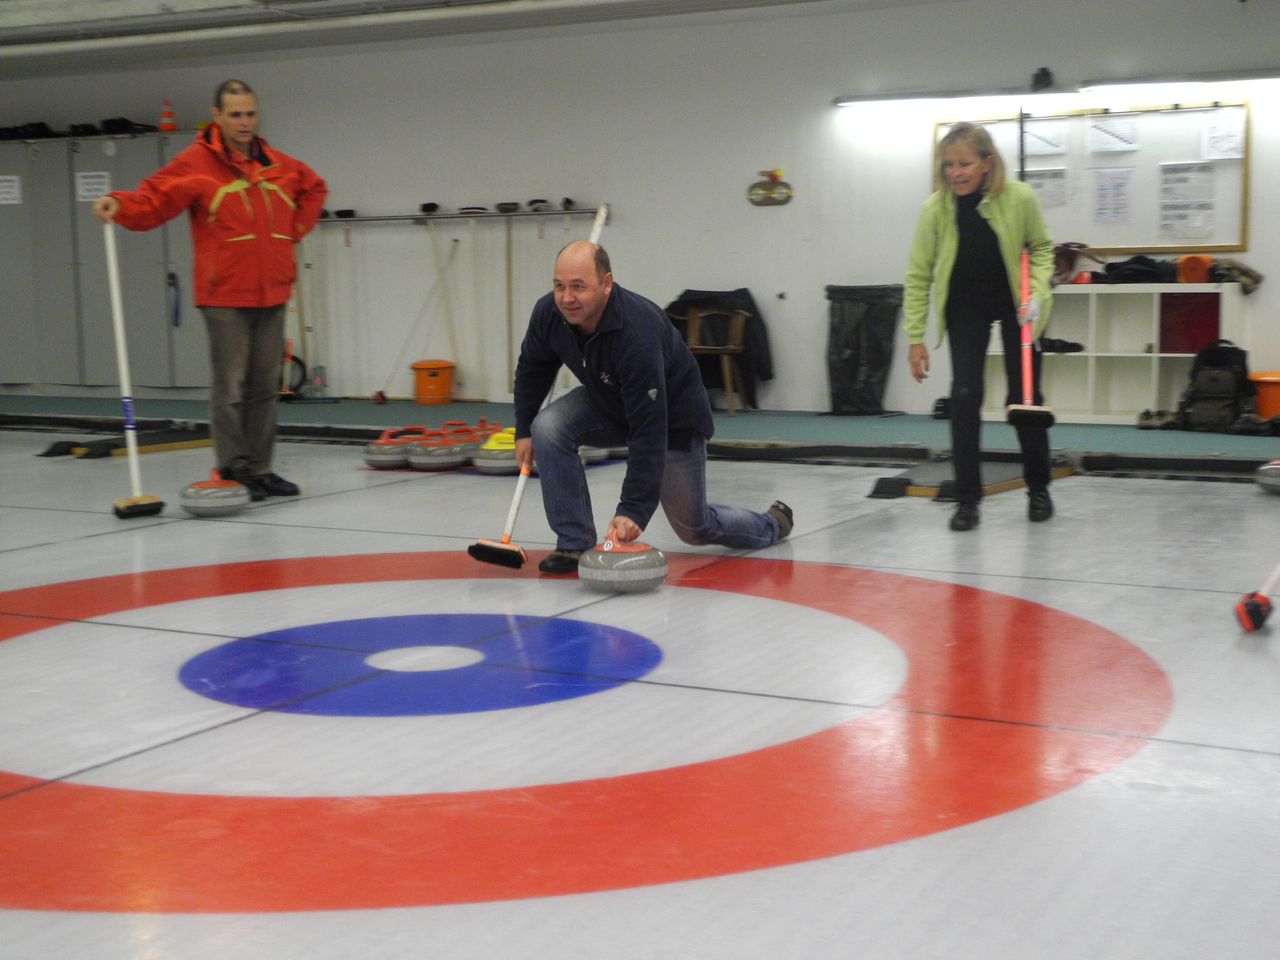 /photos/2013/S01_Curling/121011_2045-S01-MD_07.jpg